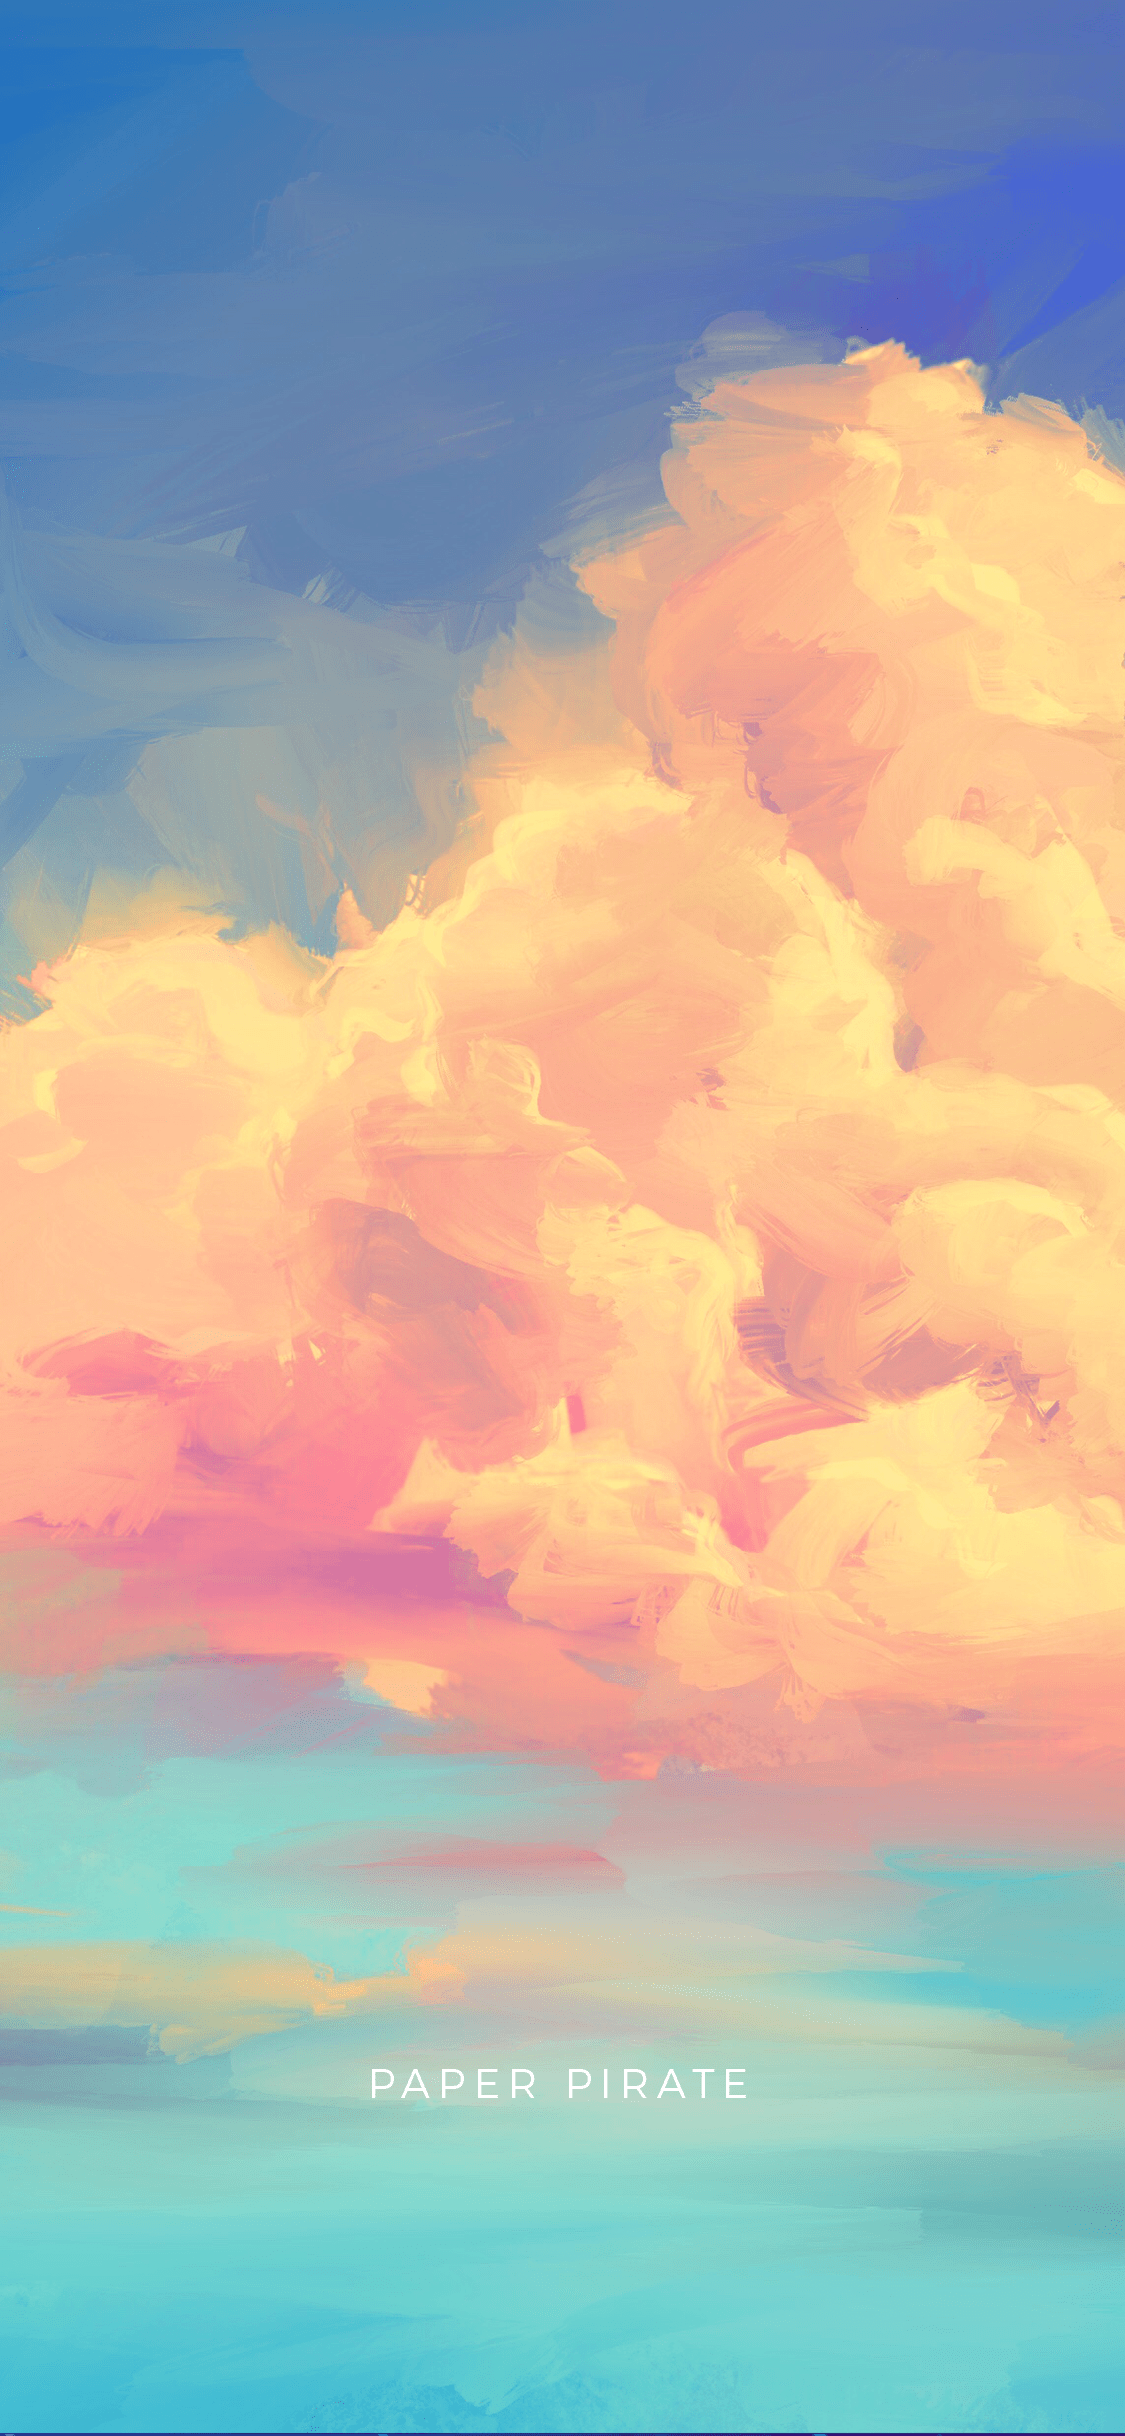 A beautiful wallpaper with a painting of clouds in the sky. - Pirate